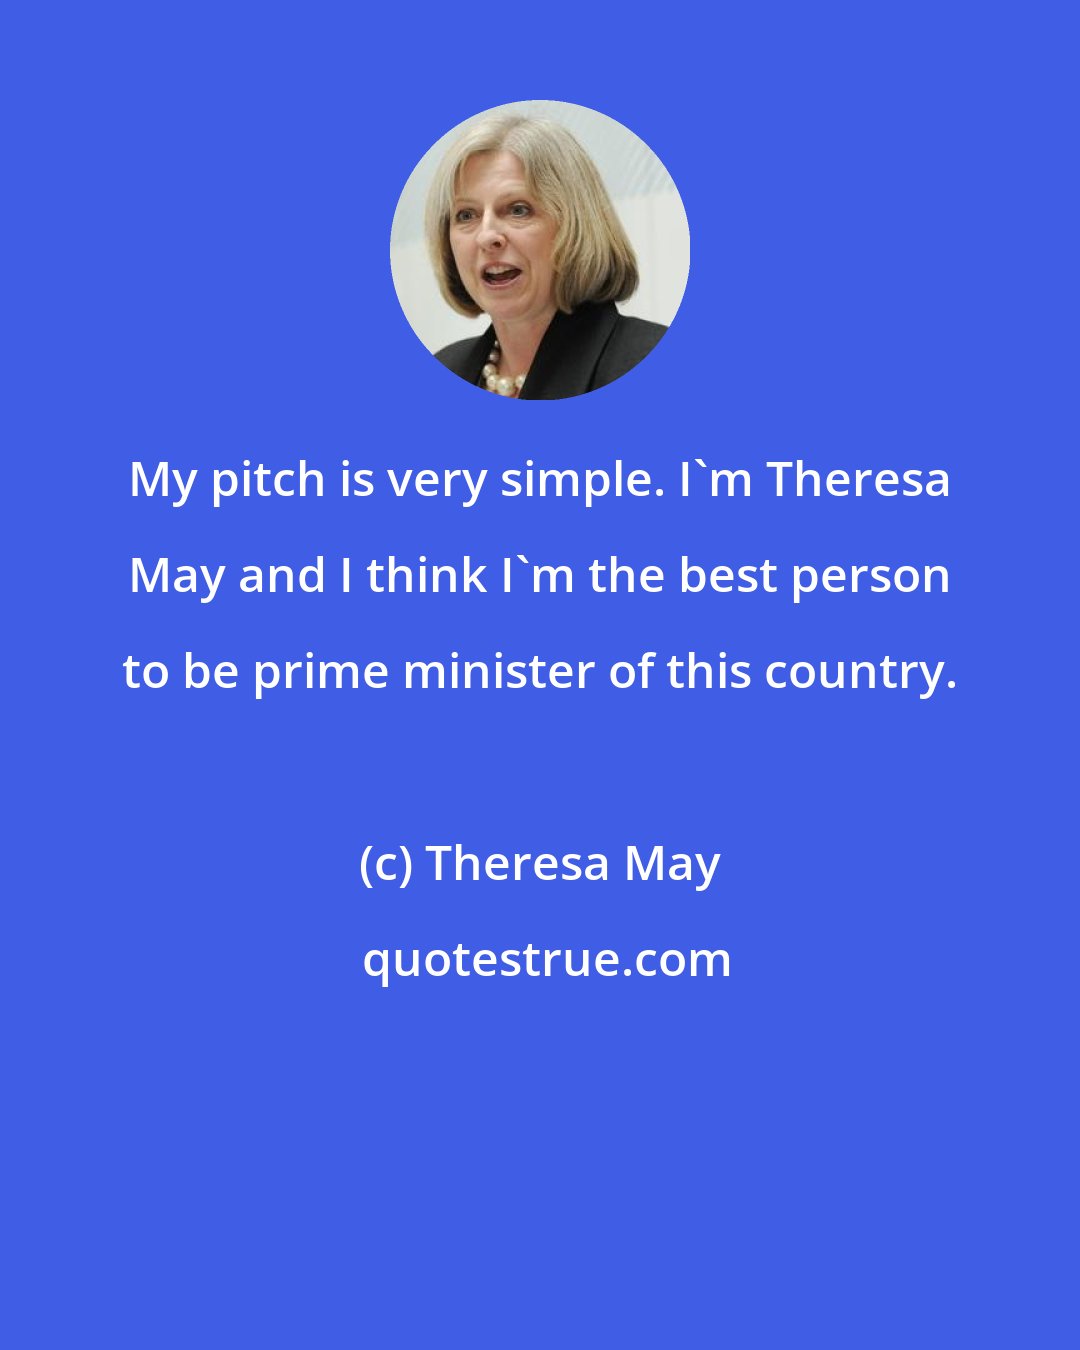 Theresa May: My pitch is very simple. I'm Theresa May and I think I'm the best person to be prime minister of this country.